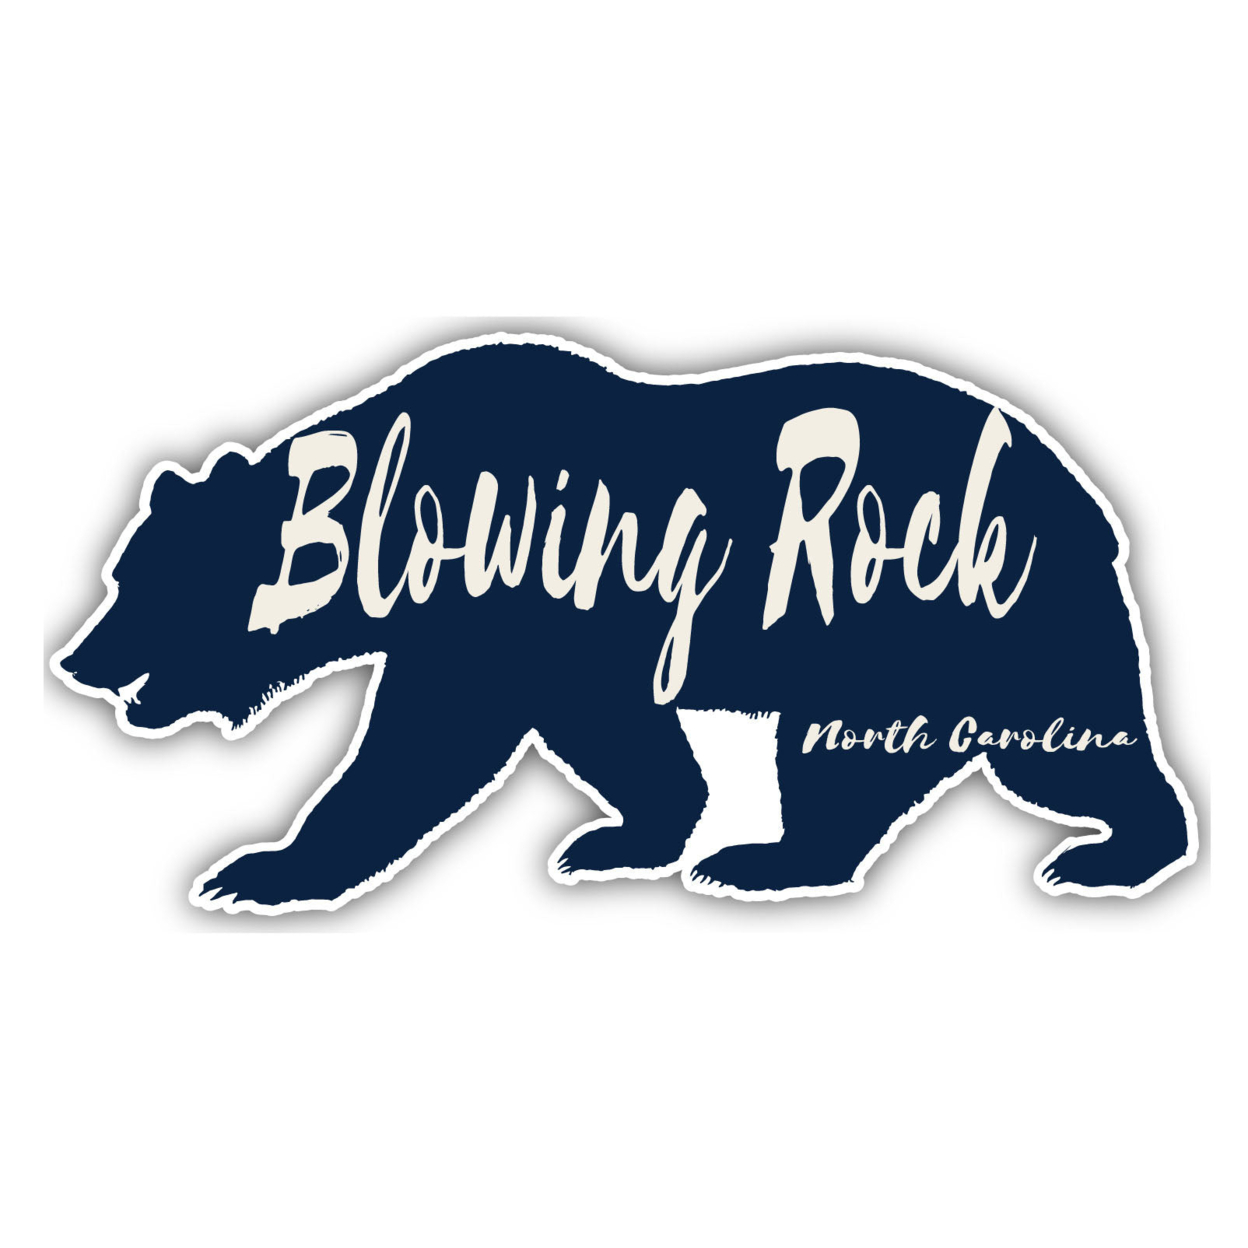 Blowing Rock North Carolina Souvenir Decorative Stickers (Choose Theme And Size) - 4-Pack, 8-Inch, Bear